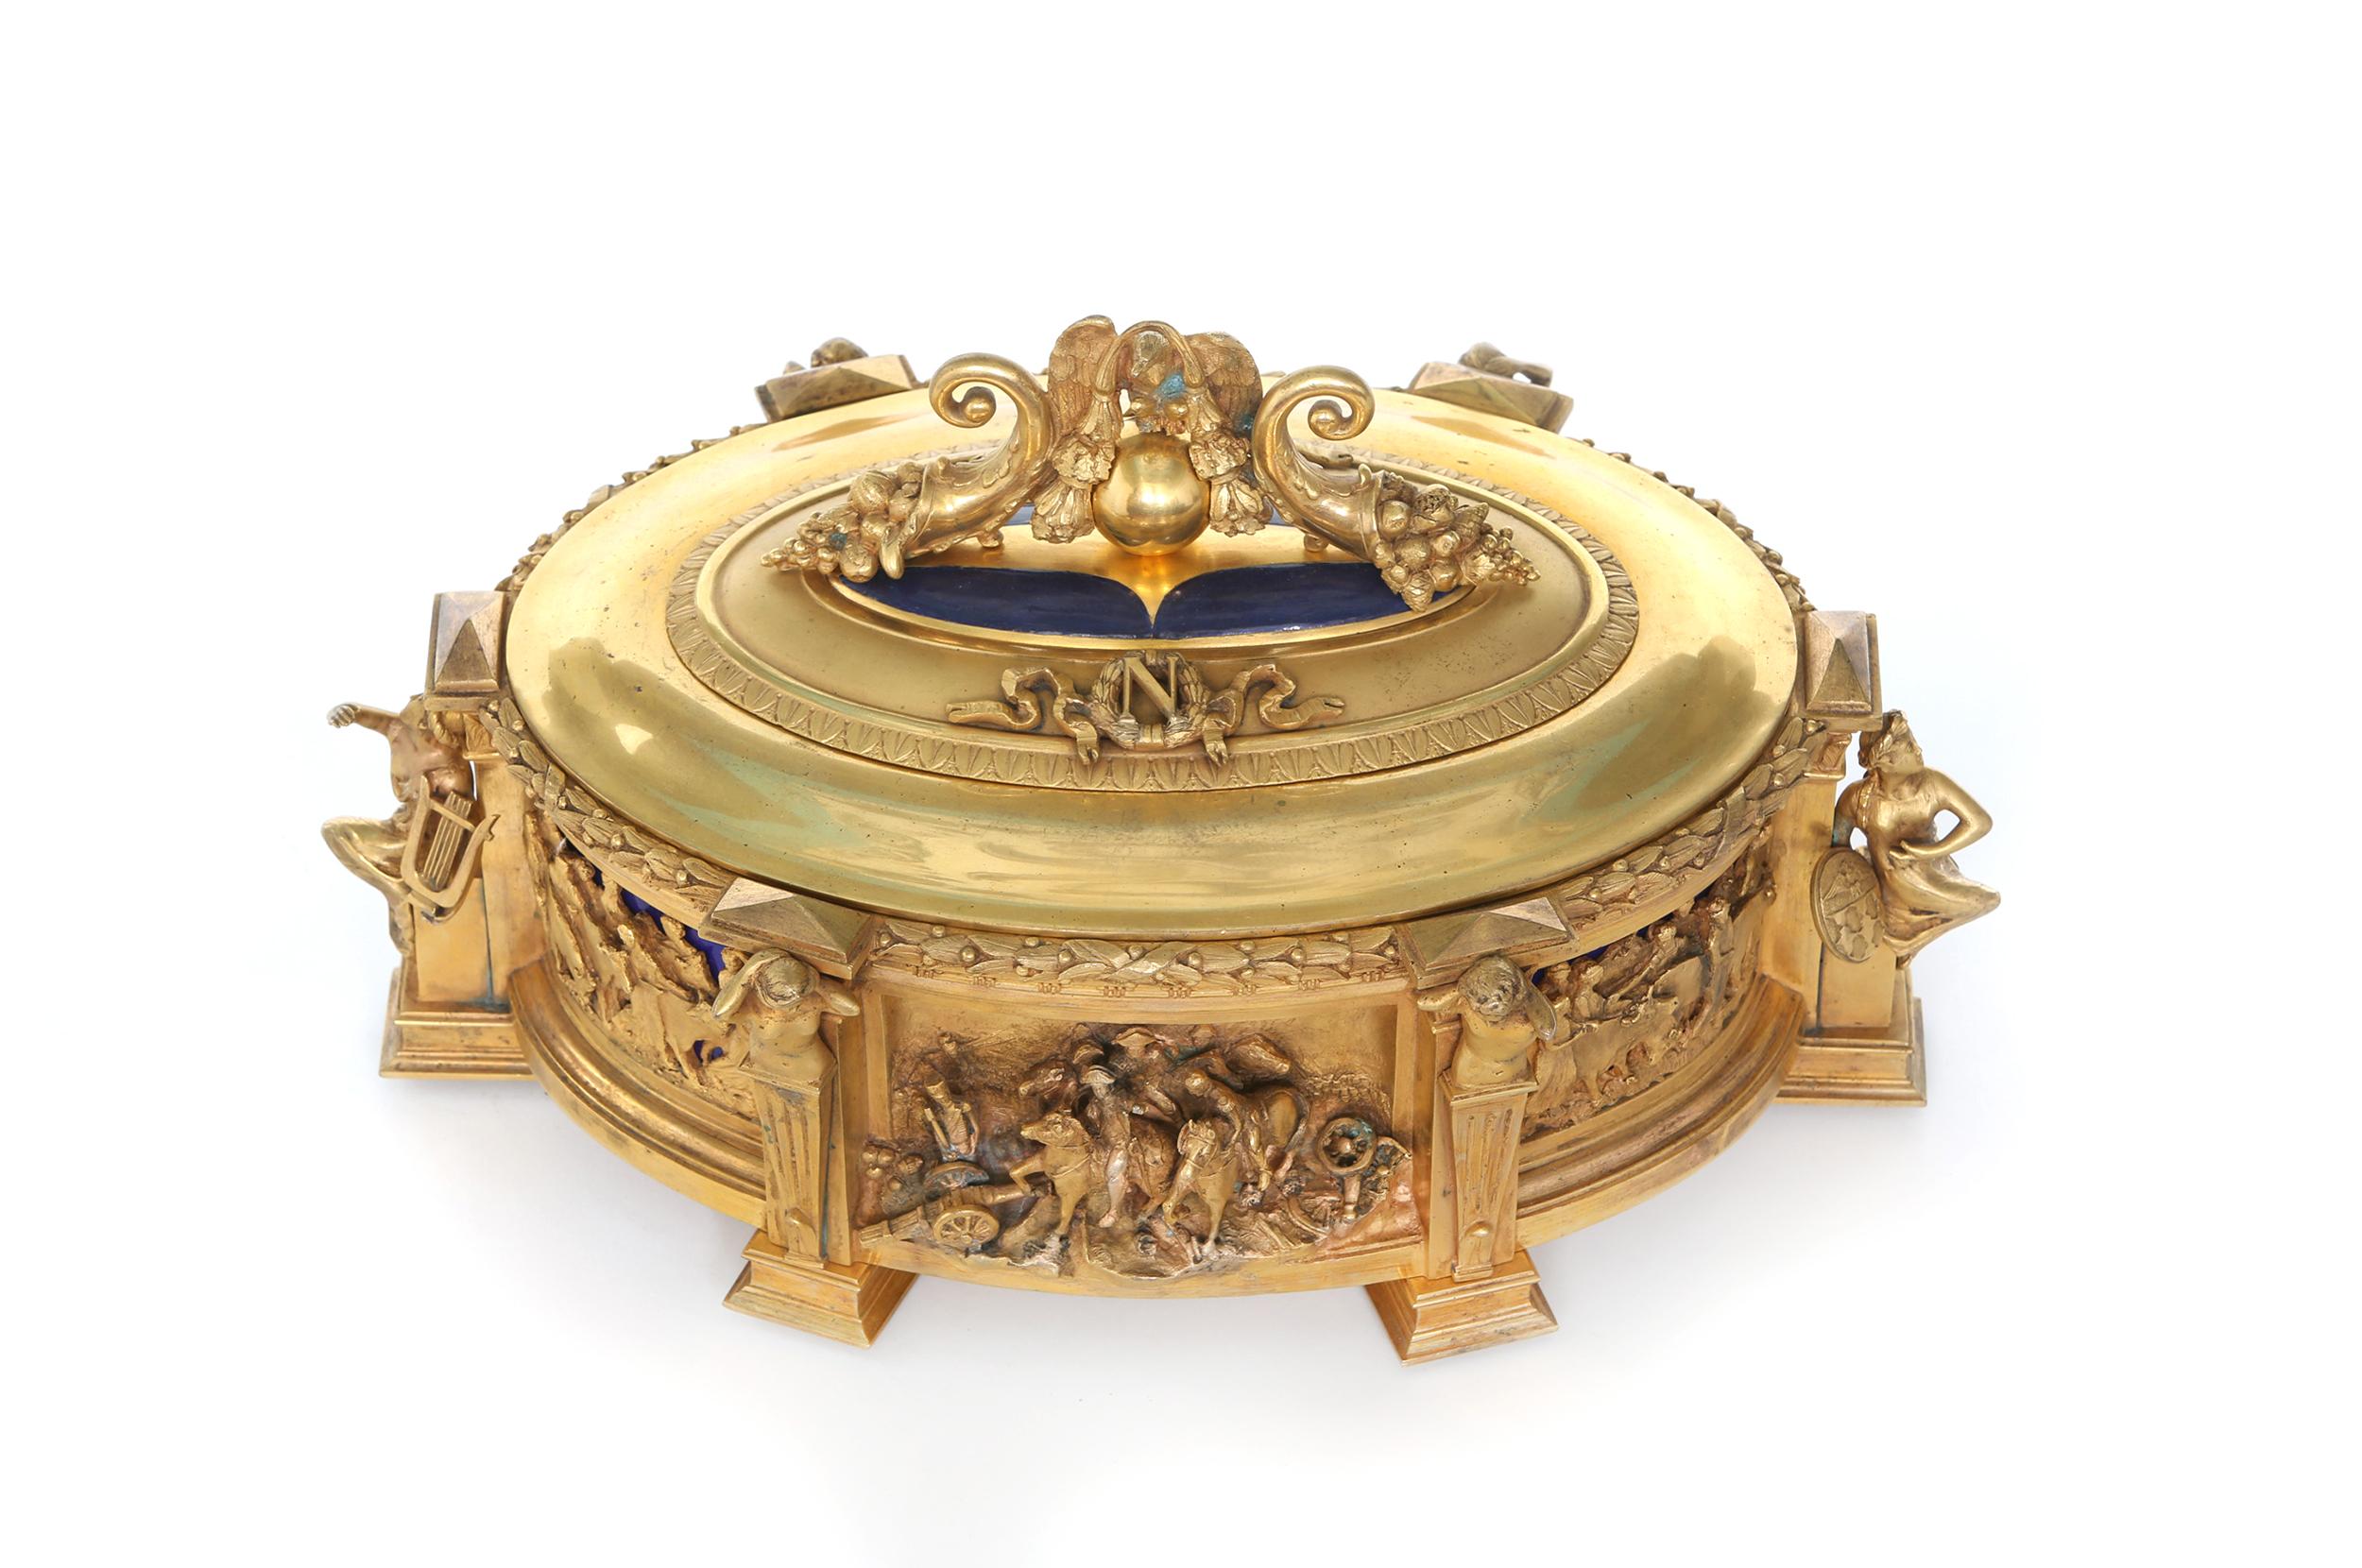 Mid-19th century gilt bronze with lapis lazuli covered top oval shape centerpiece box / decorative piece with exterior design details of Napoleon leading his men on horses. The centerpiece is in great antique condition. Minor wear consistent with